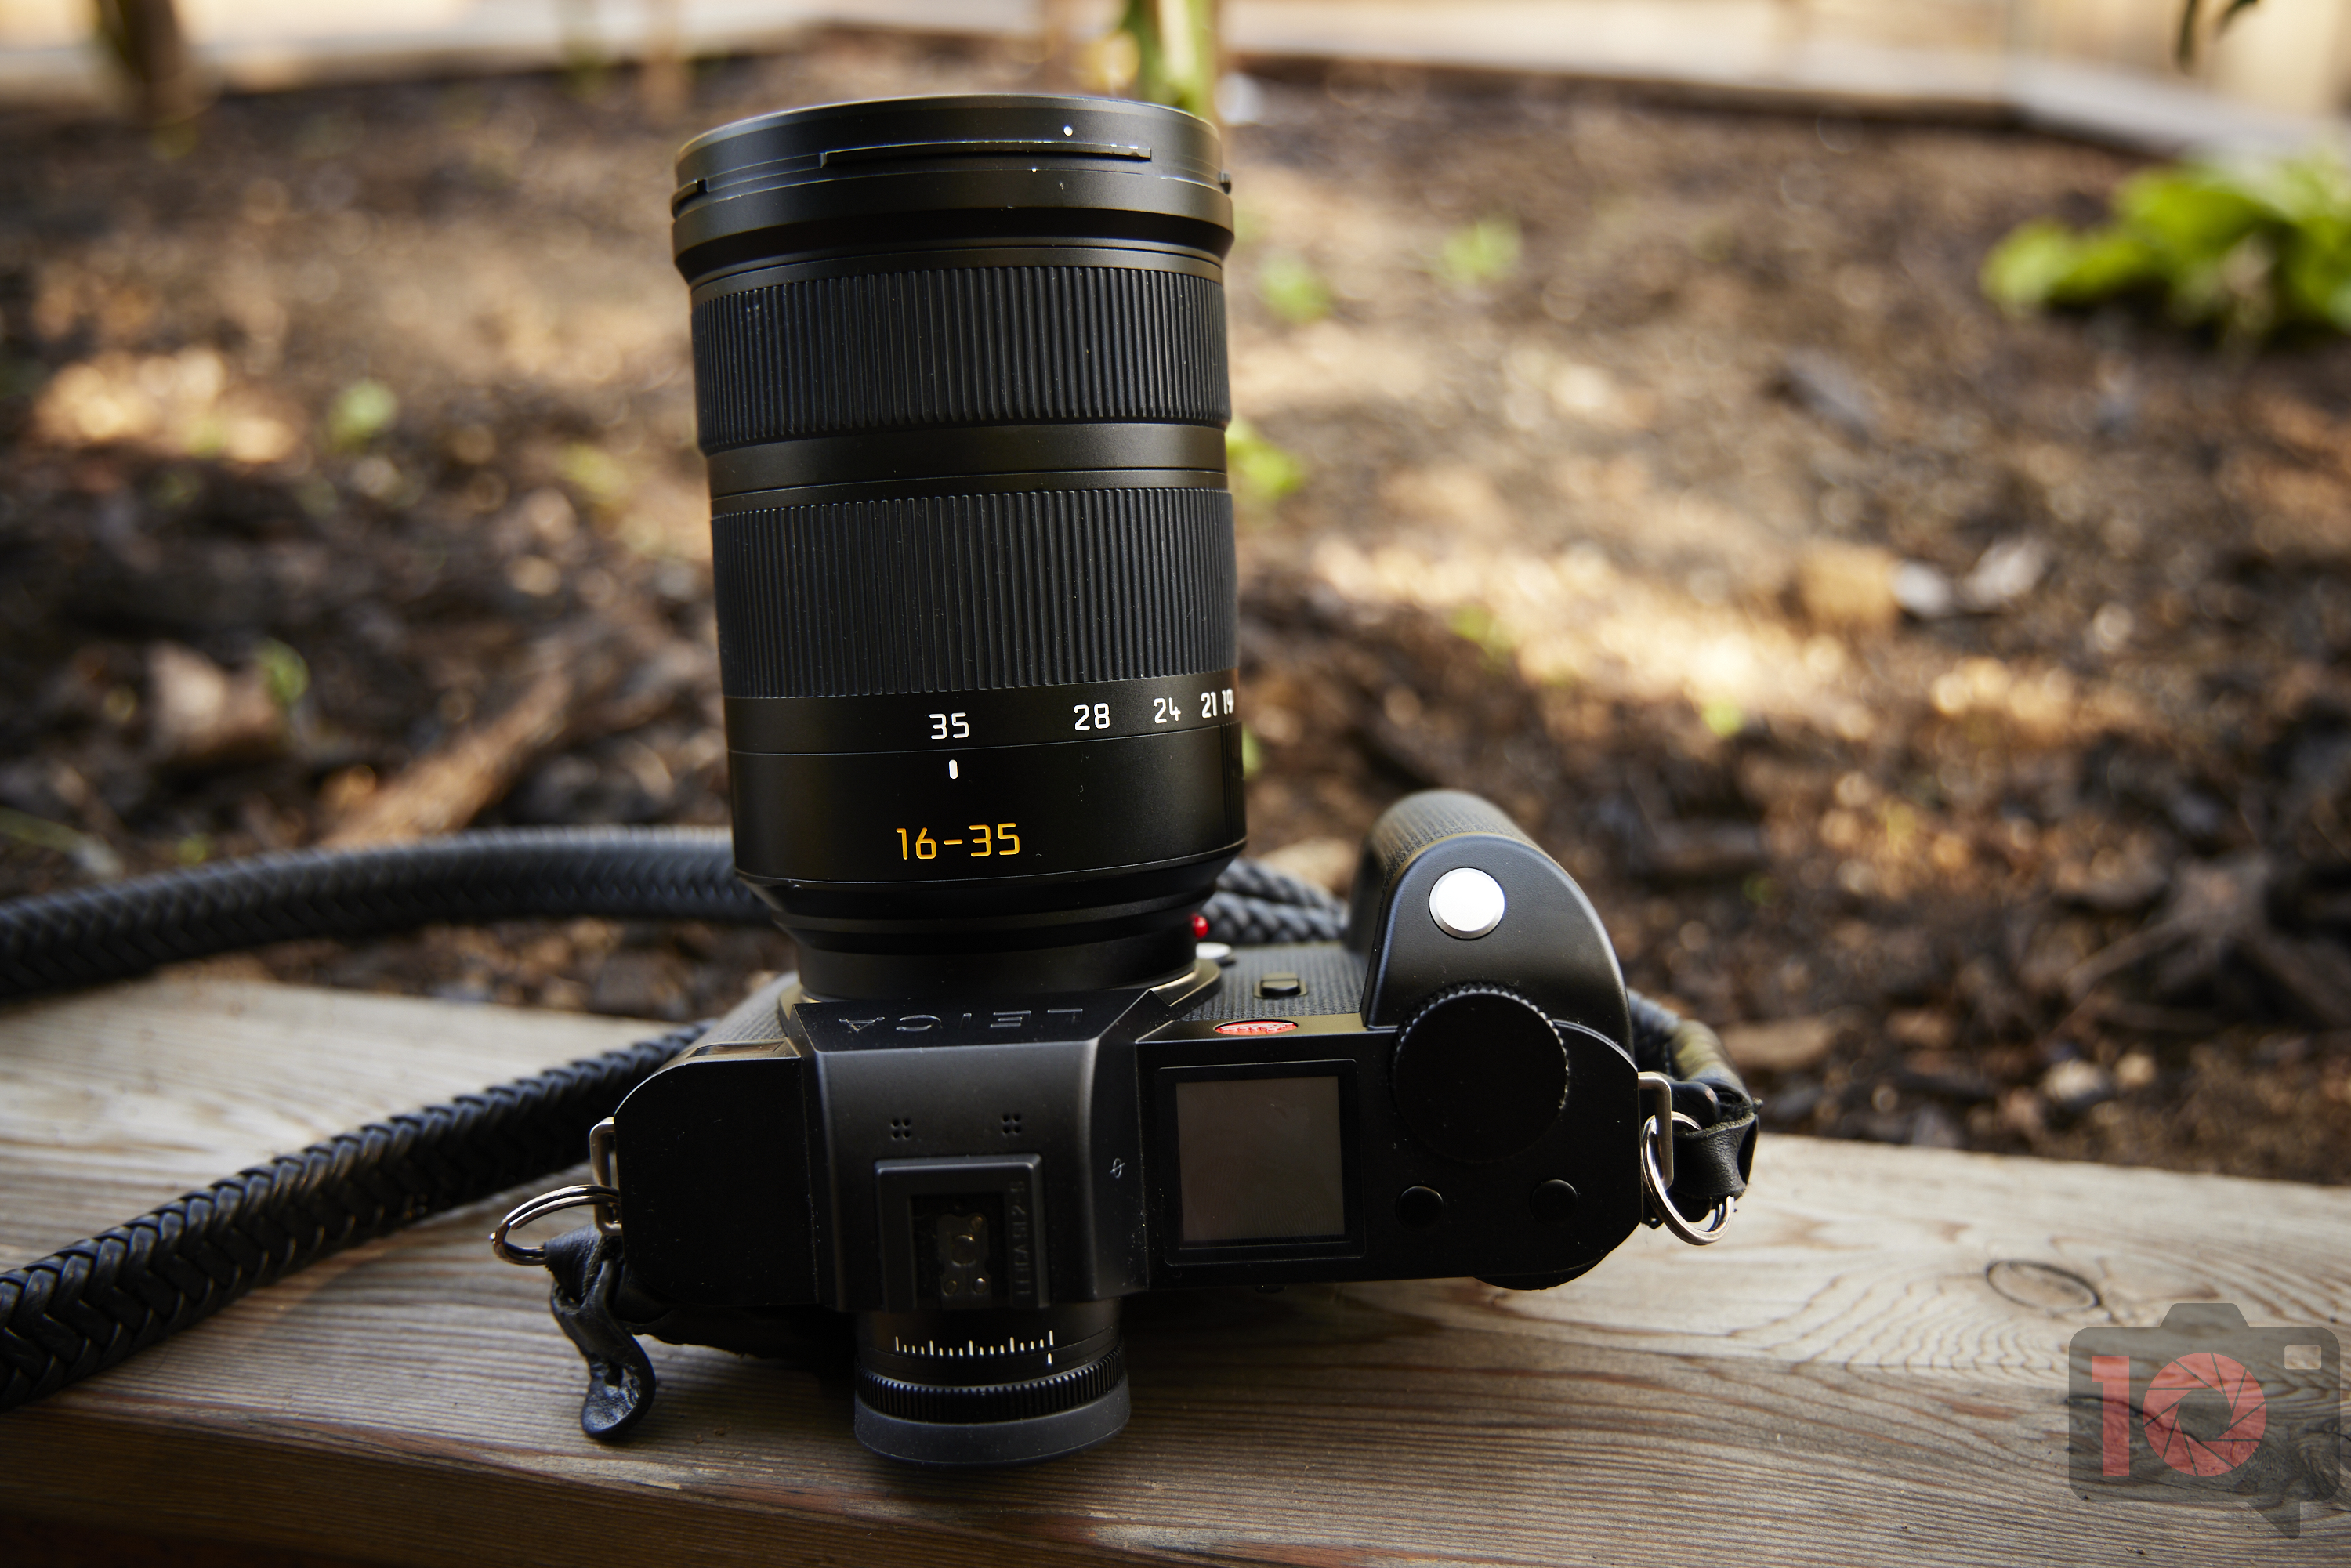 Chris Gampat The Phoblographer Leica 16-35mm f3.5-4 SL Review product images 41-200s400 5